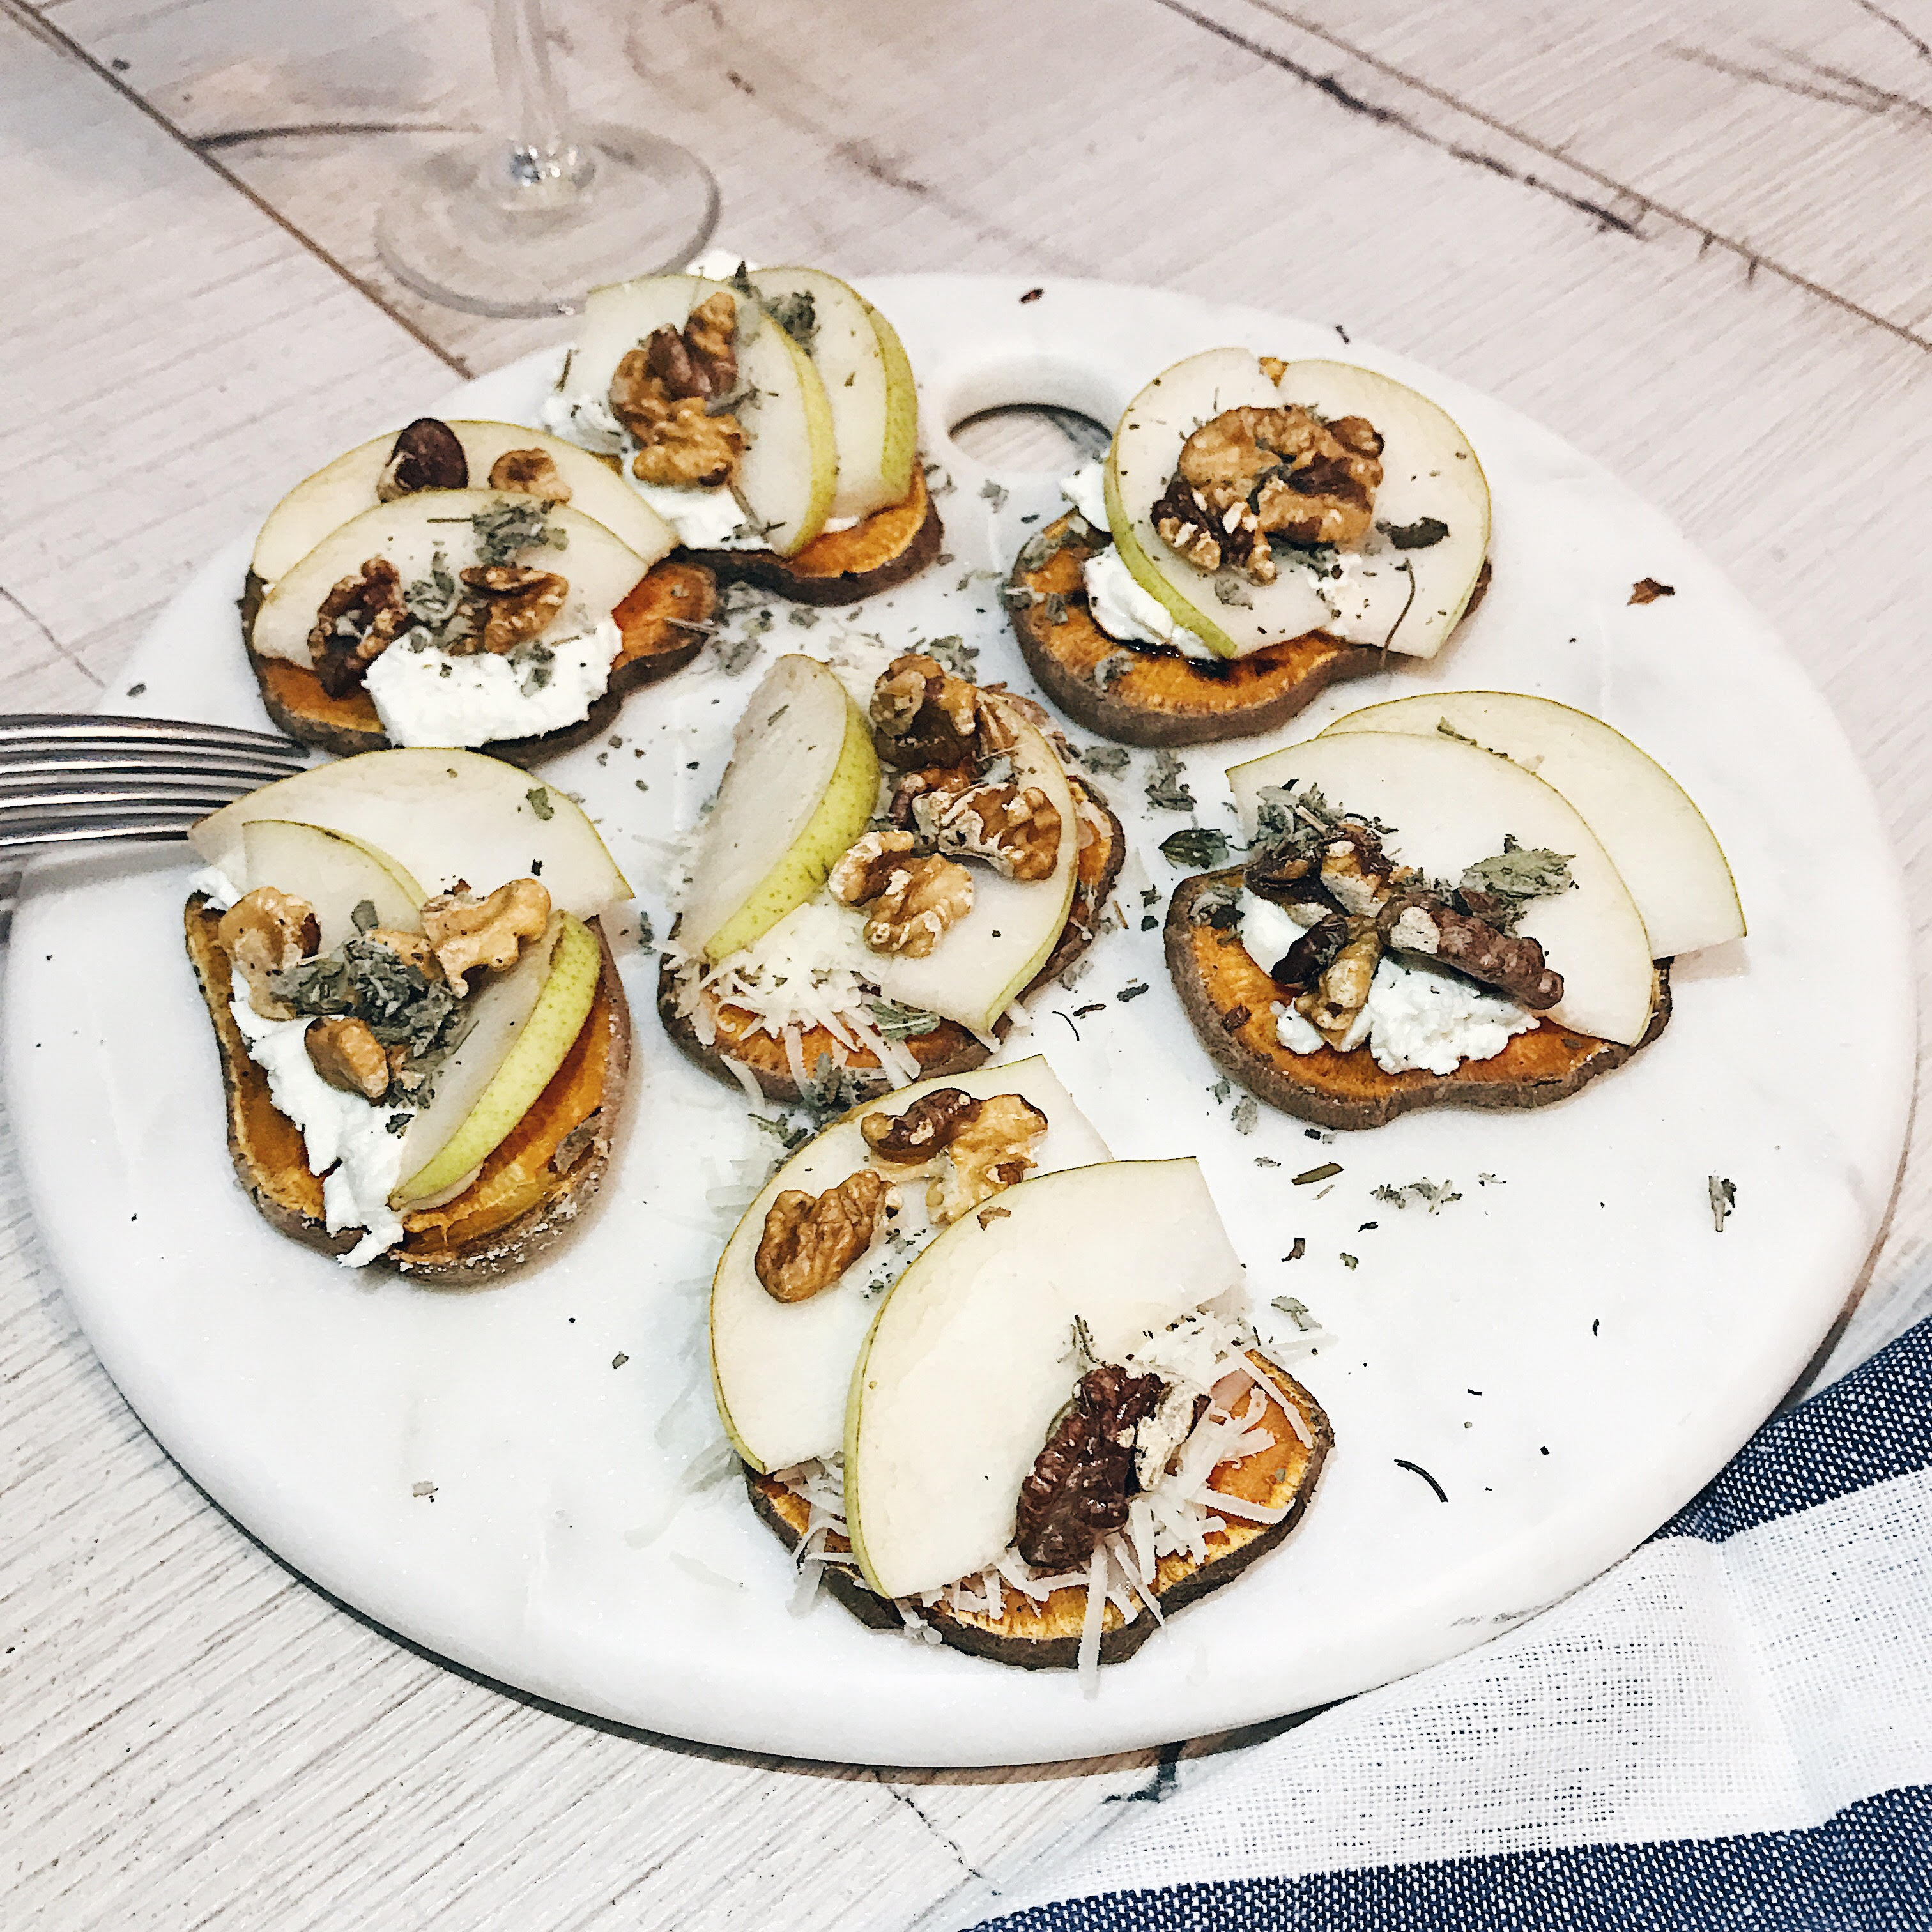 @projectfairytale: Sweet Potato Crostinis with Goat Chees, Gruyere, Pears and Nuts